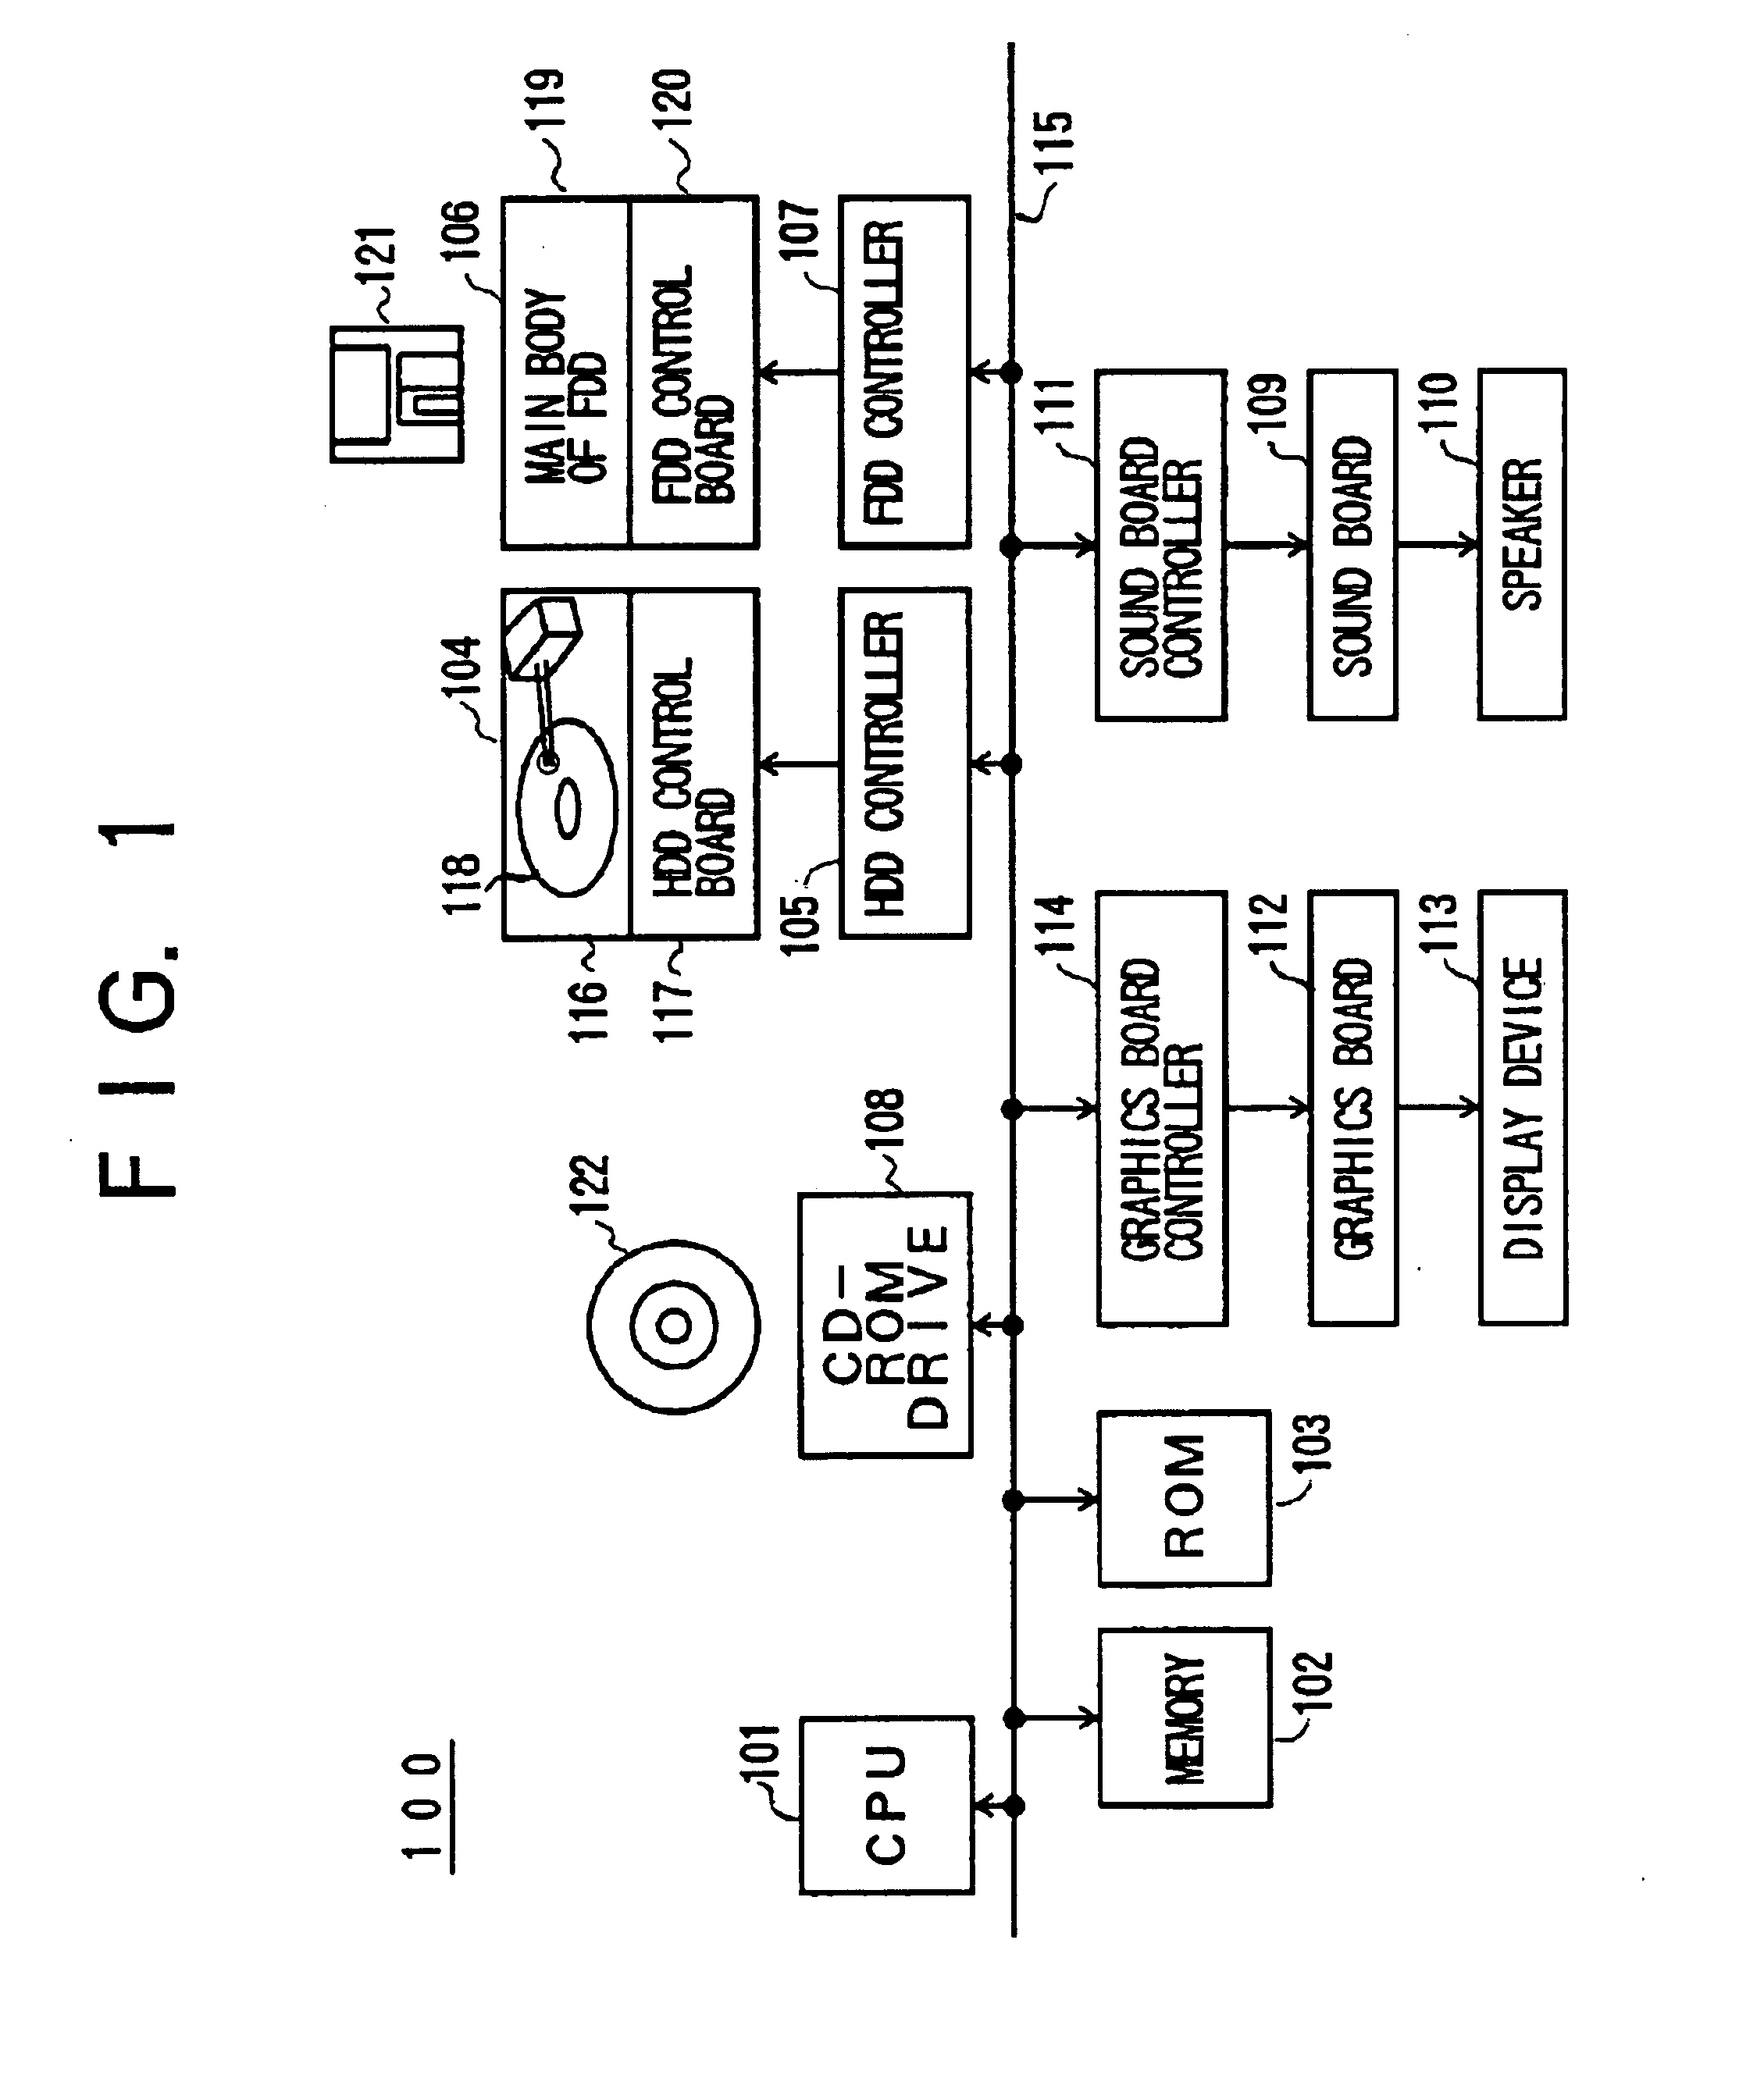 Information processing apparatus, power control method and recording medium to control a plurality of driving units according to the type of data to be processed